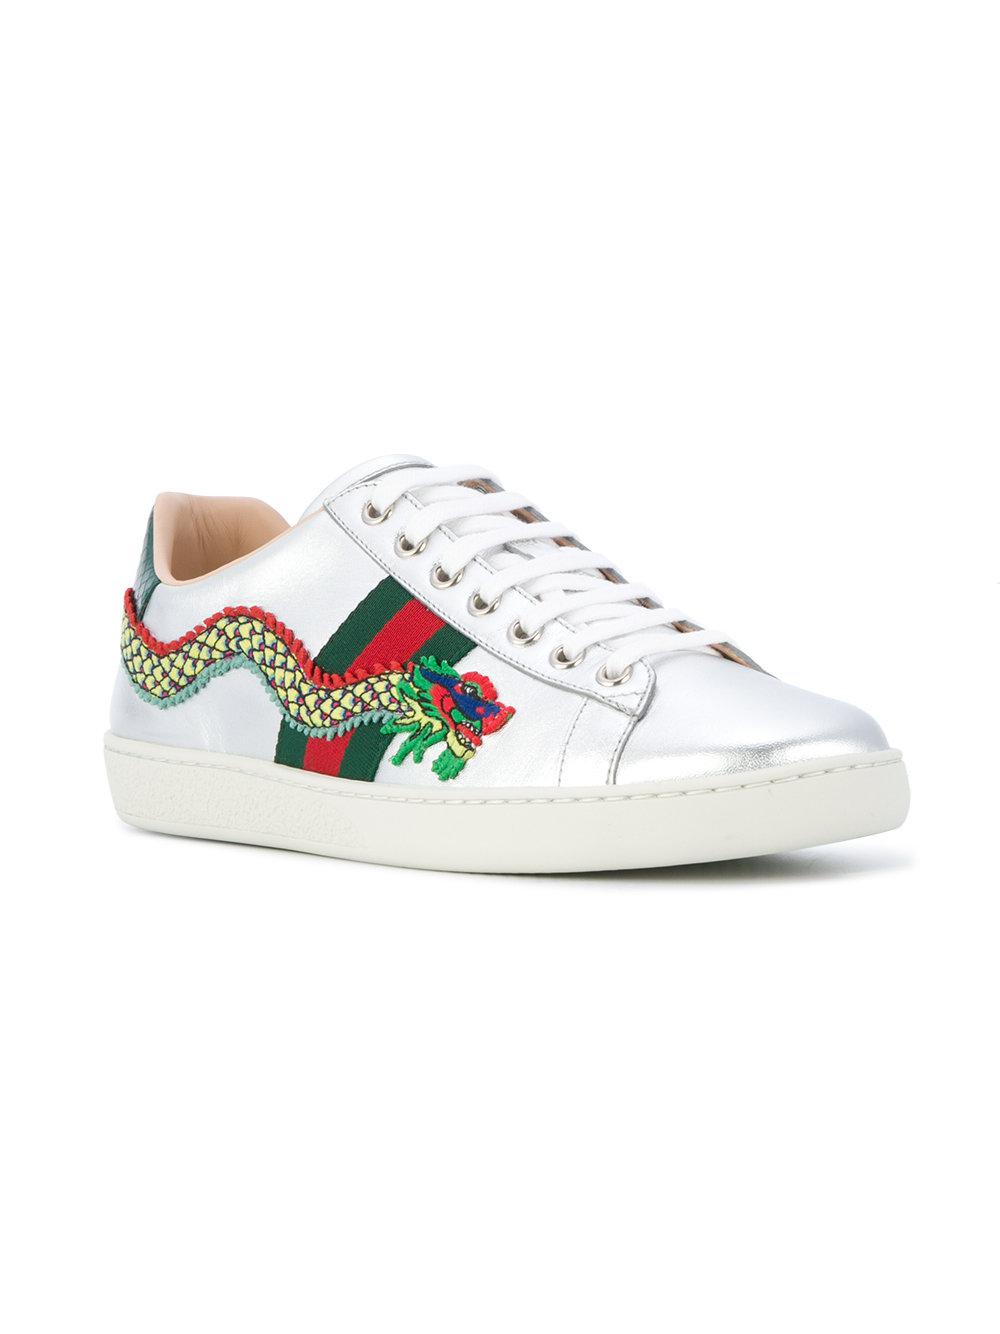 Gucci Ace Dragon Embroidered Sneakers in Metallic | Lyst